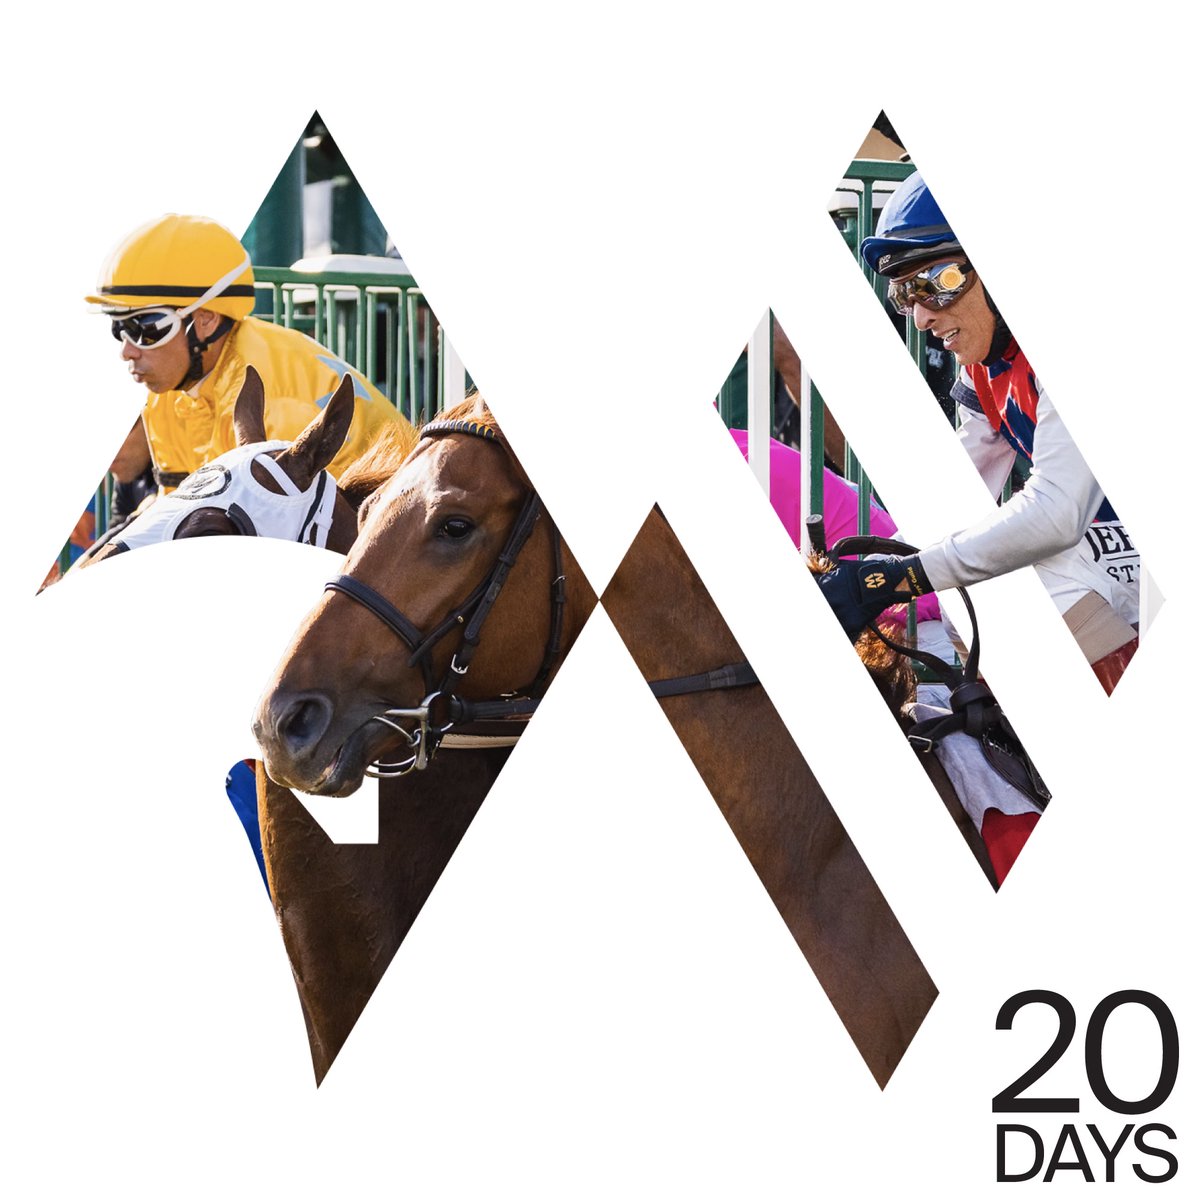 The road to the Triple Crown runs through Baltimore in 20 days. #Preakness149